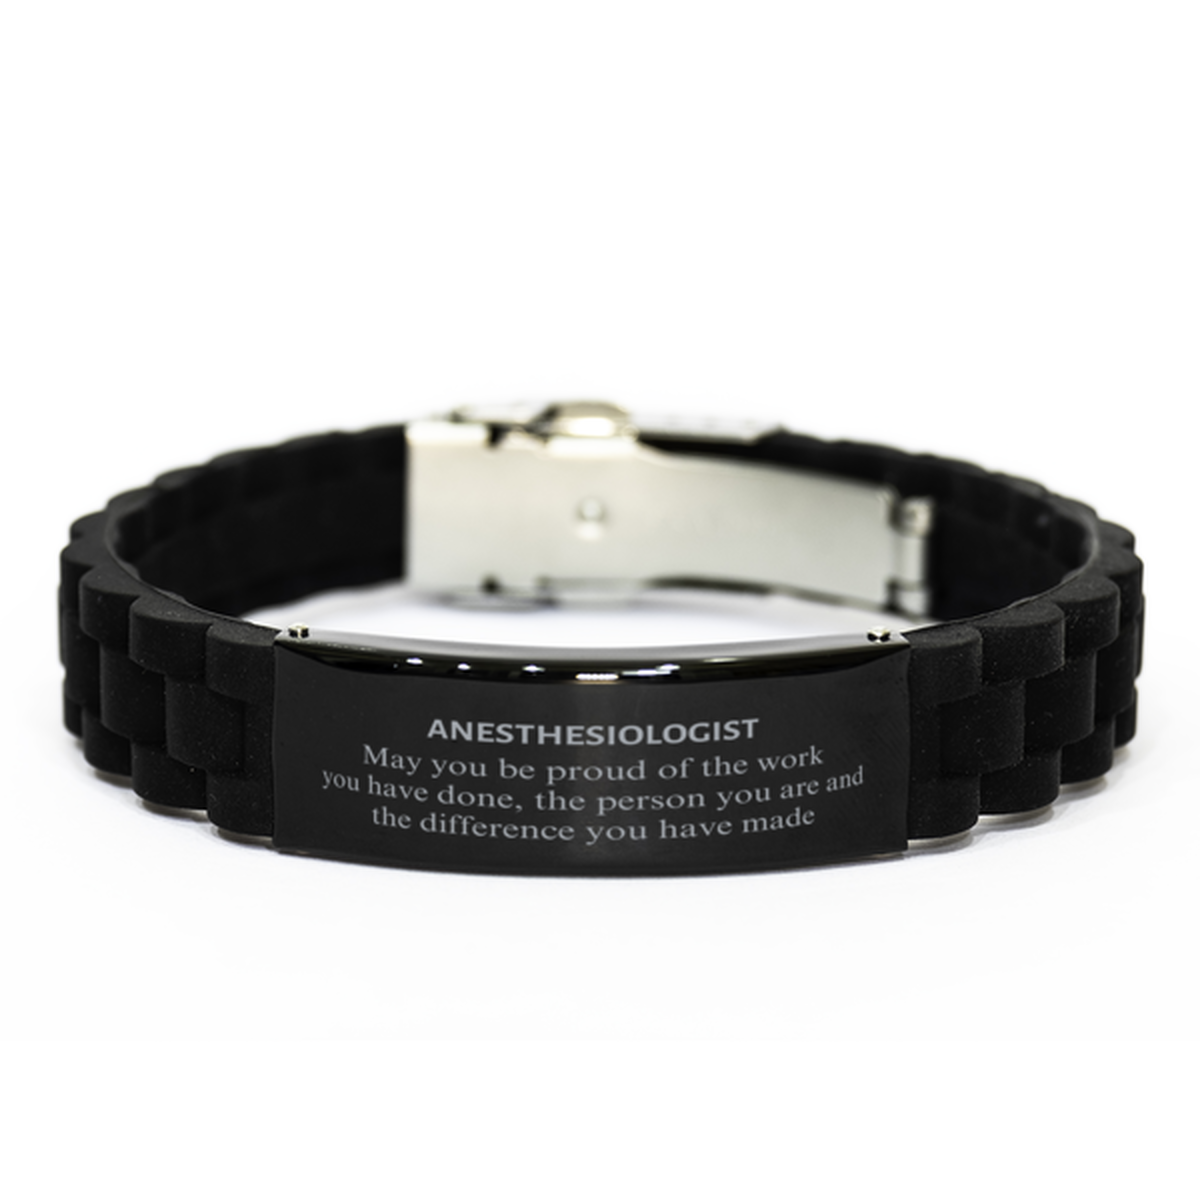 Anesthesiologist May you be proud of the work you have done, Retirement Anesthesiologist Black Glidelock Clasp Bracelet for Colleague Appreciation Gifts Amazing for Anesthesiologist